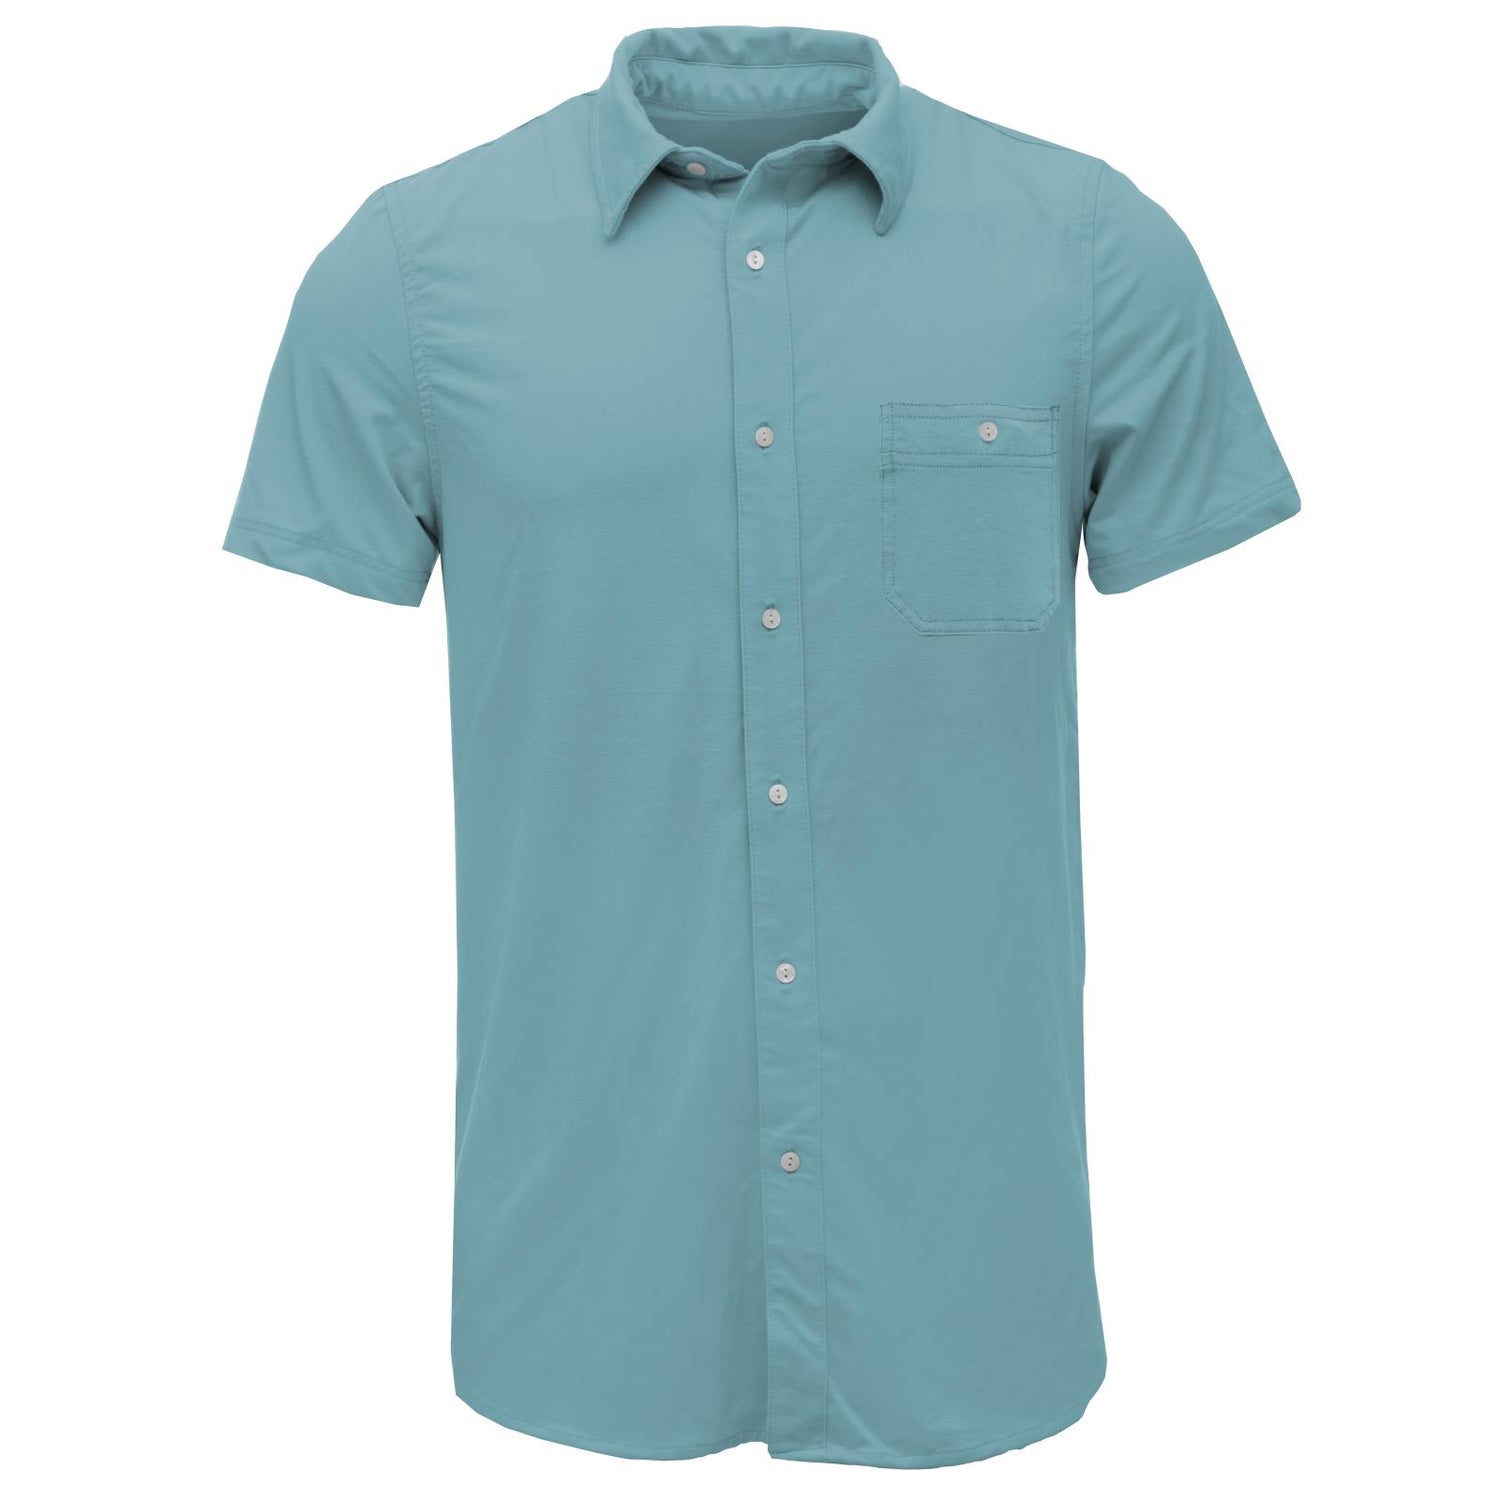 Men's Short Sleeve Woven Button Down Shirt with Pocket in Glacier